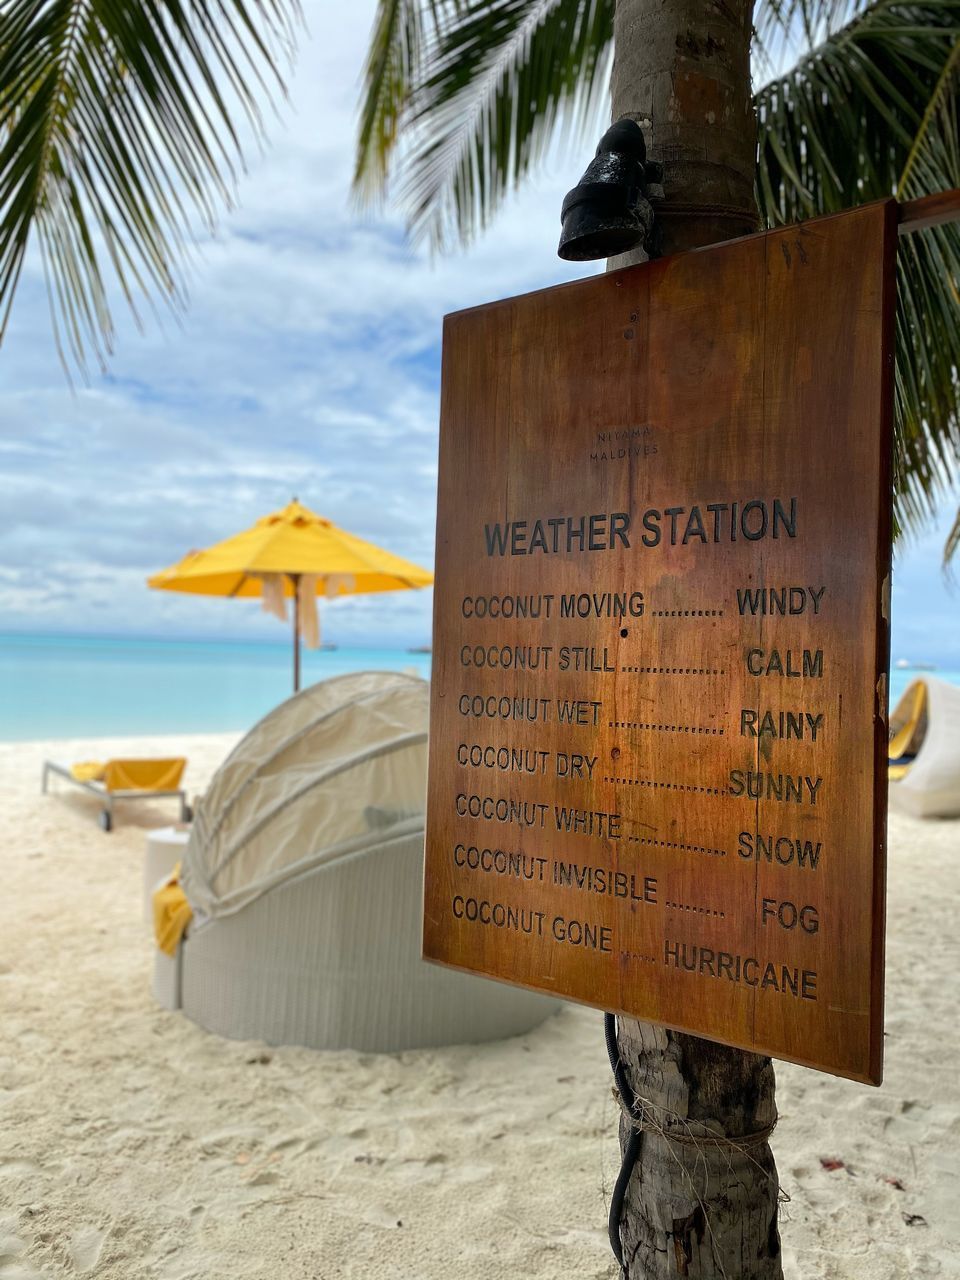 INFORMATION SIGN ON BEACH